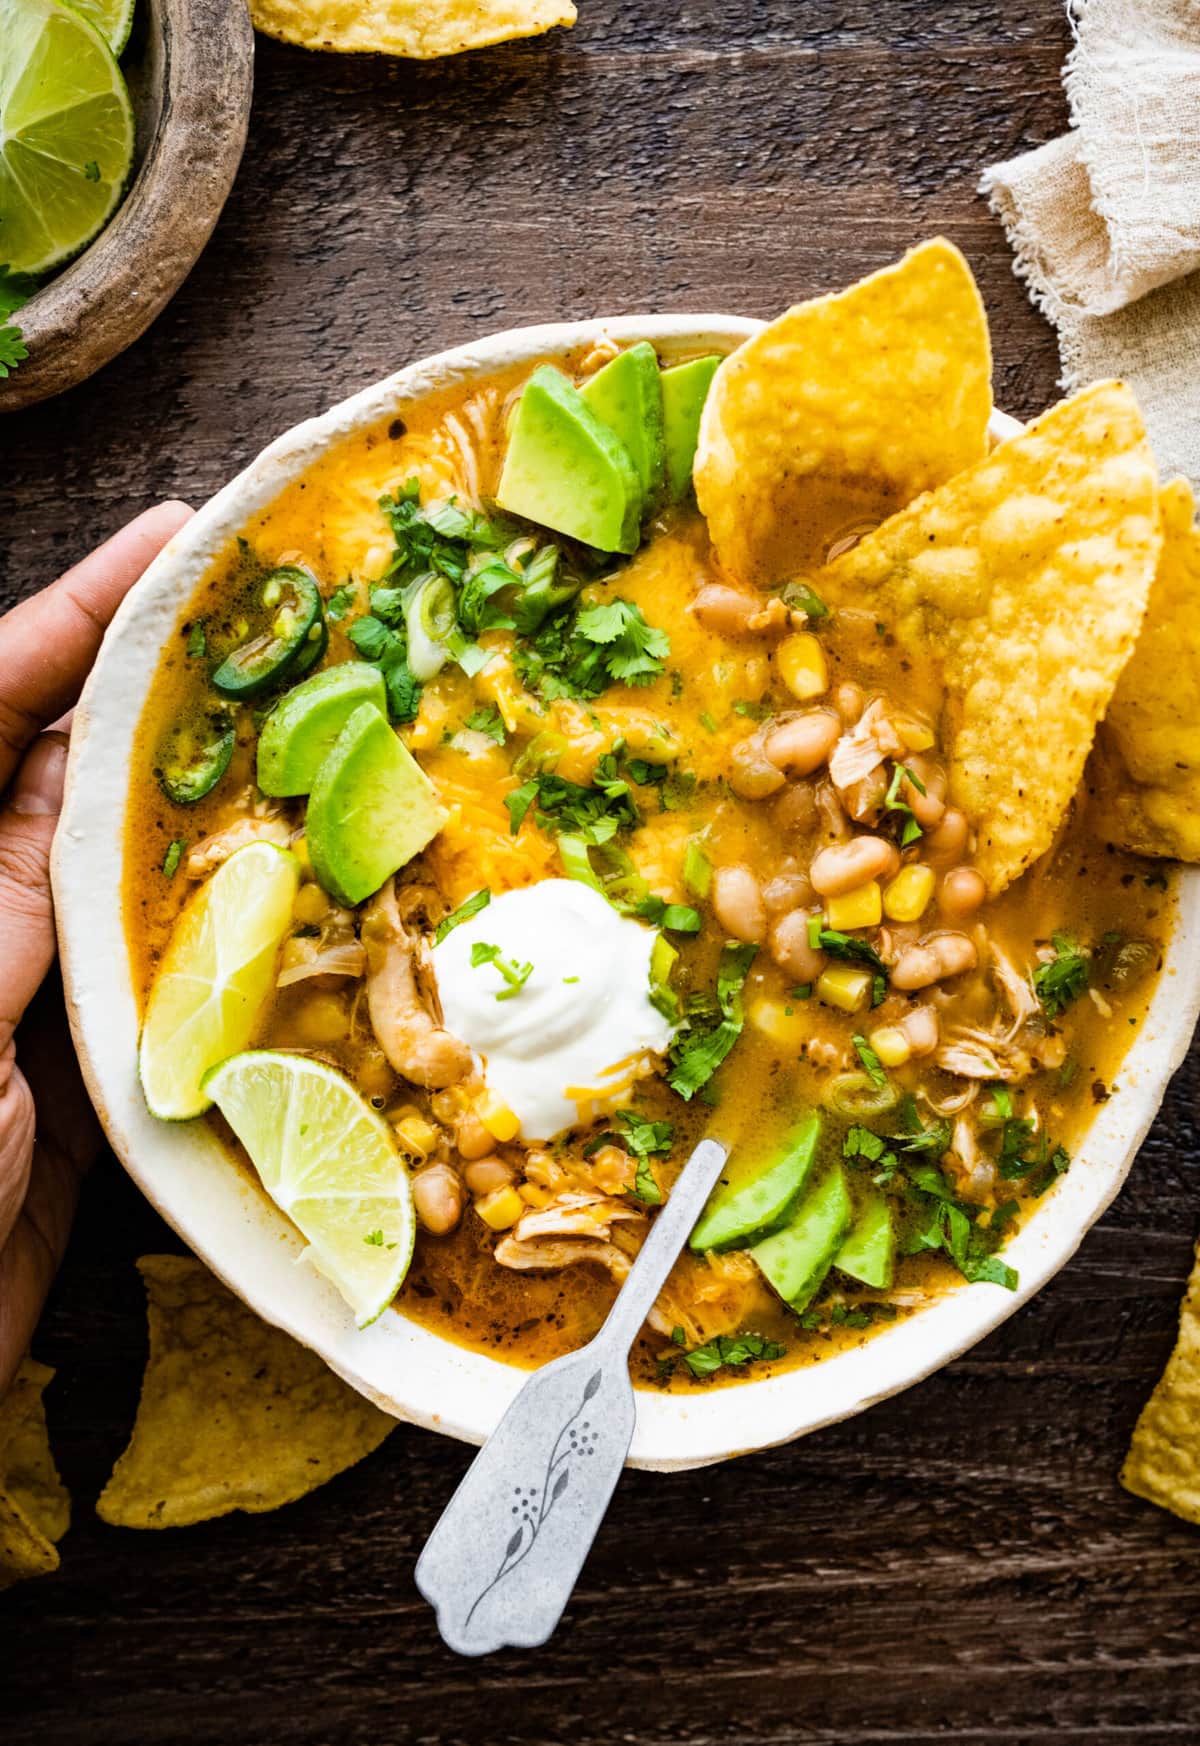 bowl of healthy white chicken chili with avocado, sour cream, lime, and cilantro as toppings. Chips in the bowl and on the side. Hands holding the side of the bowl.